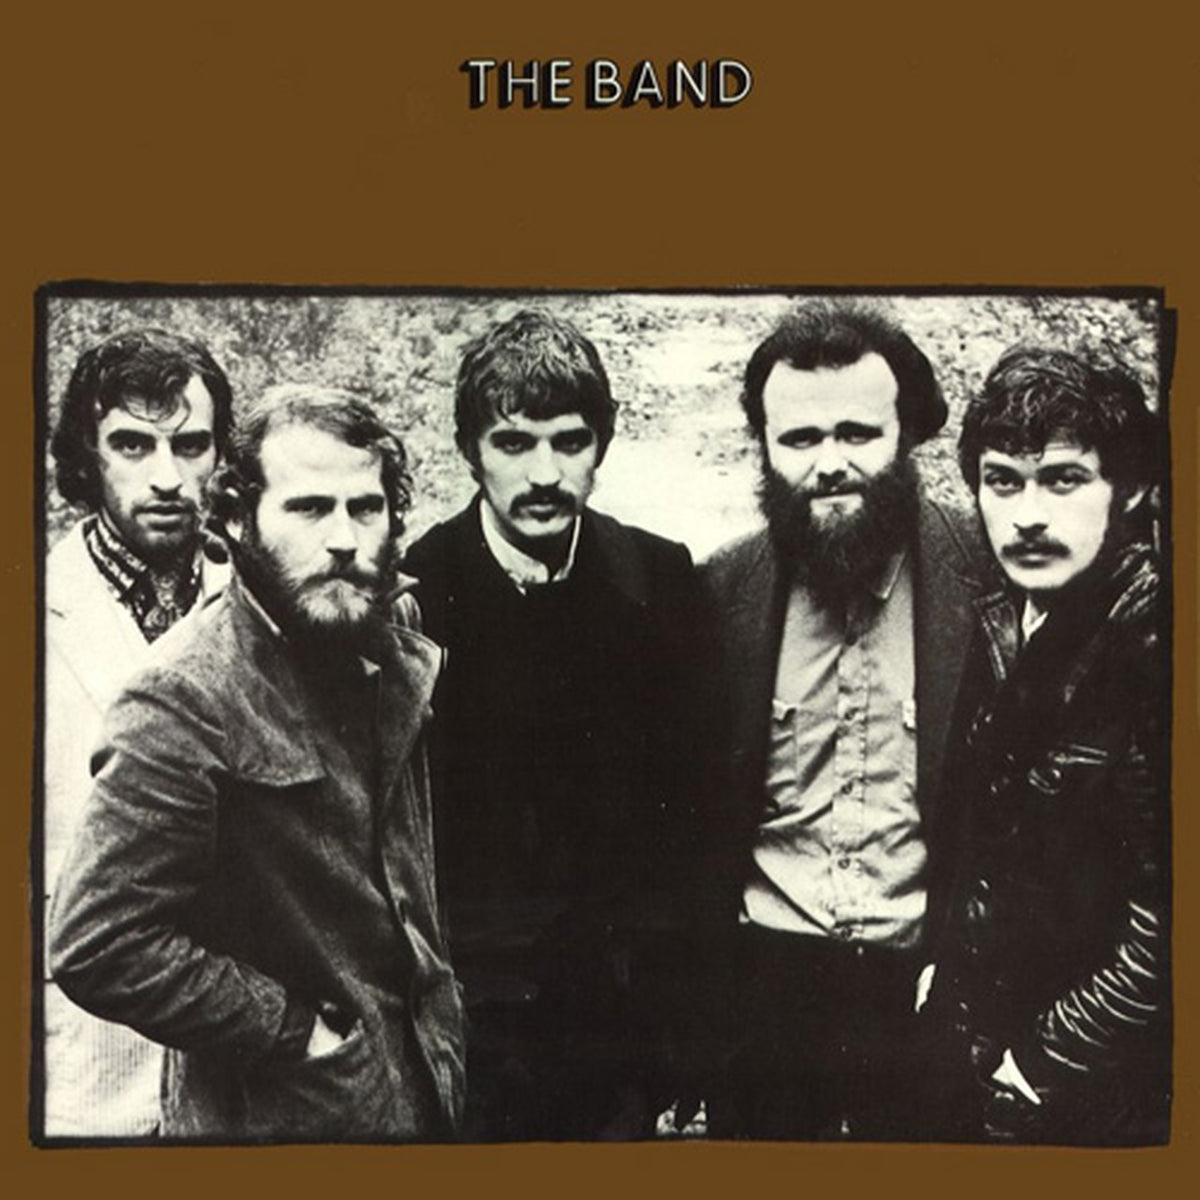 The Band - The Band (50th Anniversary Edition)